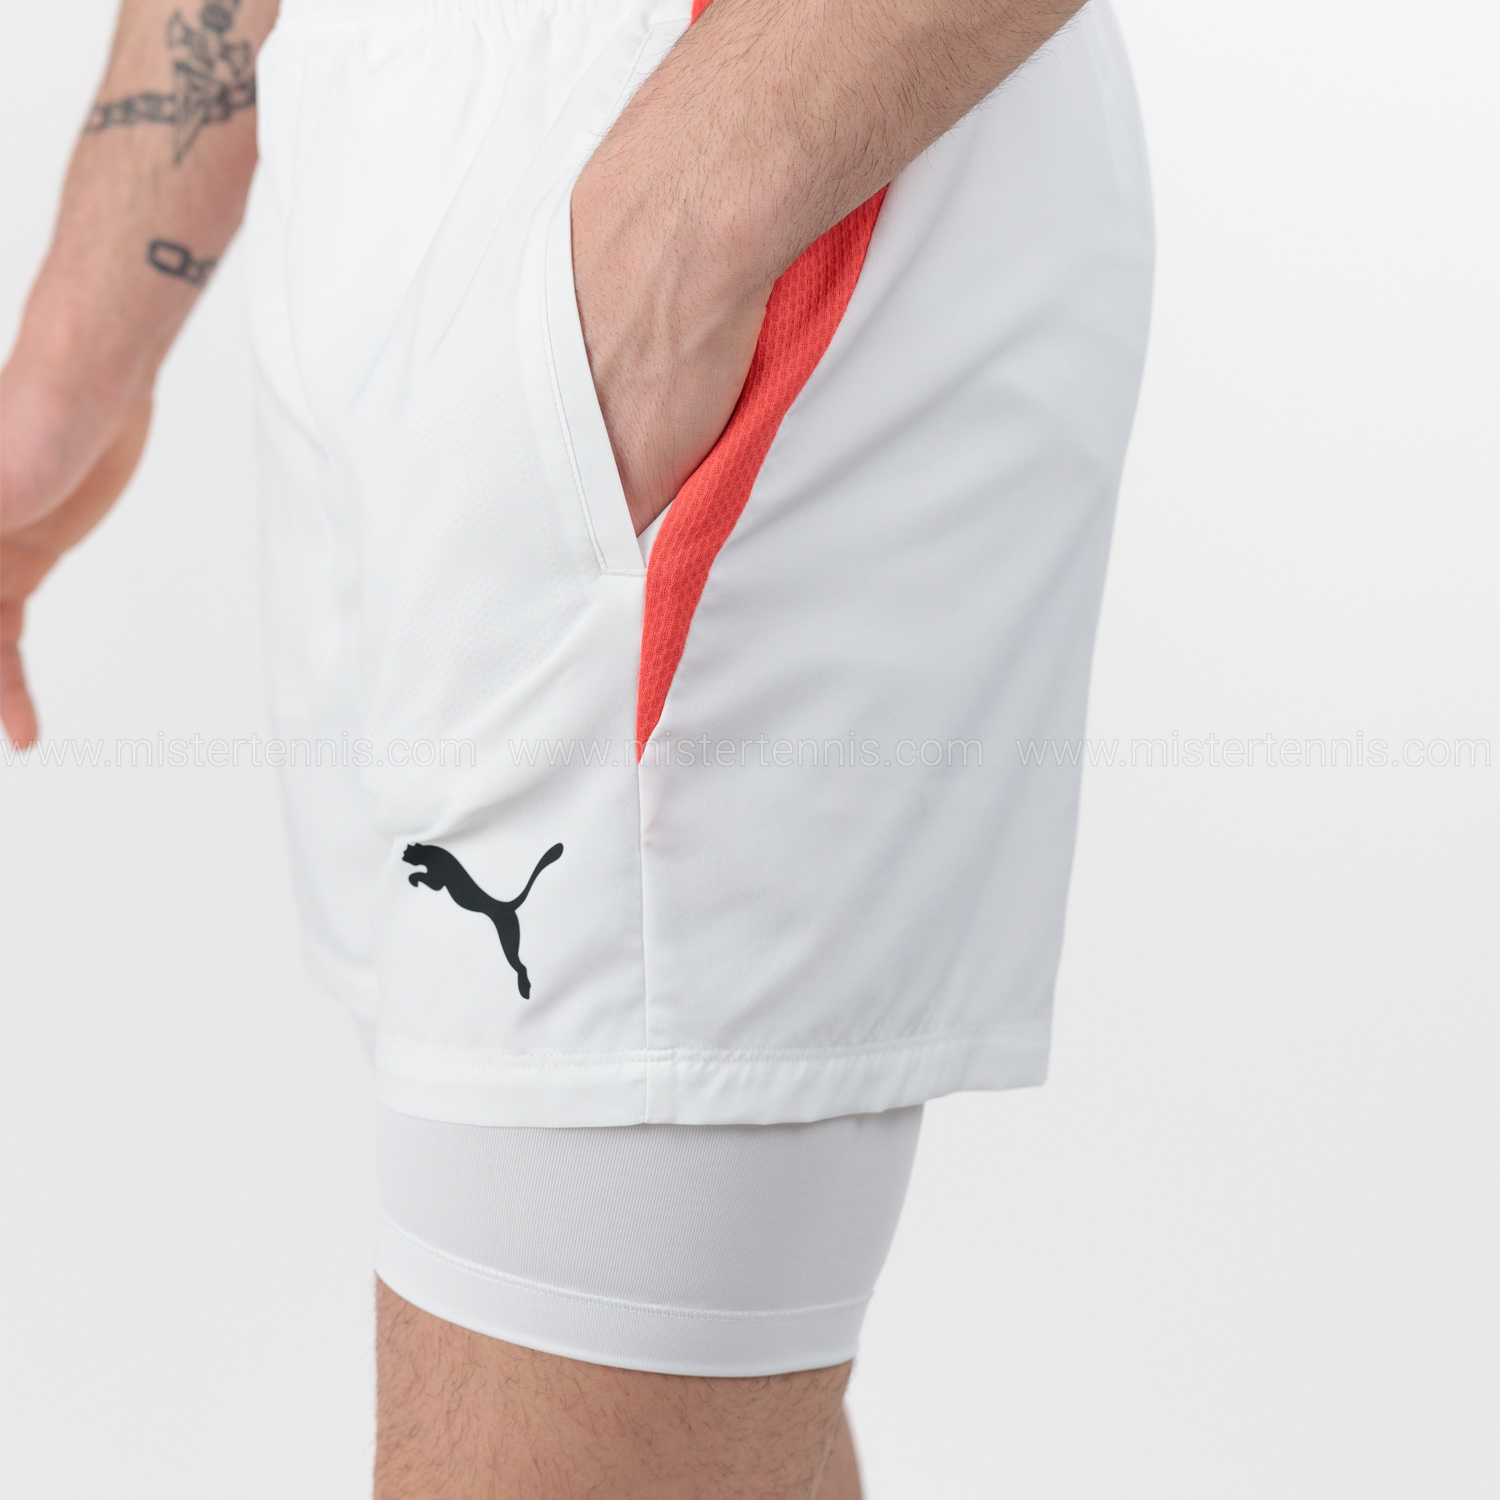 Puma Individual TeamGOAL 2 in 1 5in Shorts - White/Active Red